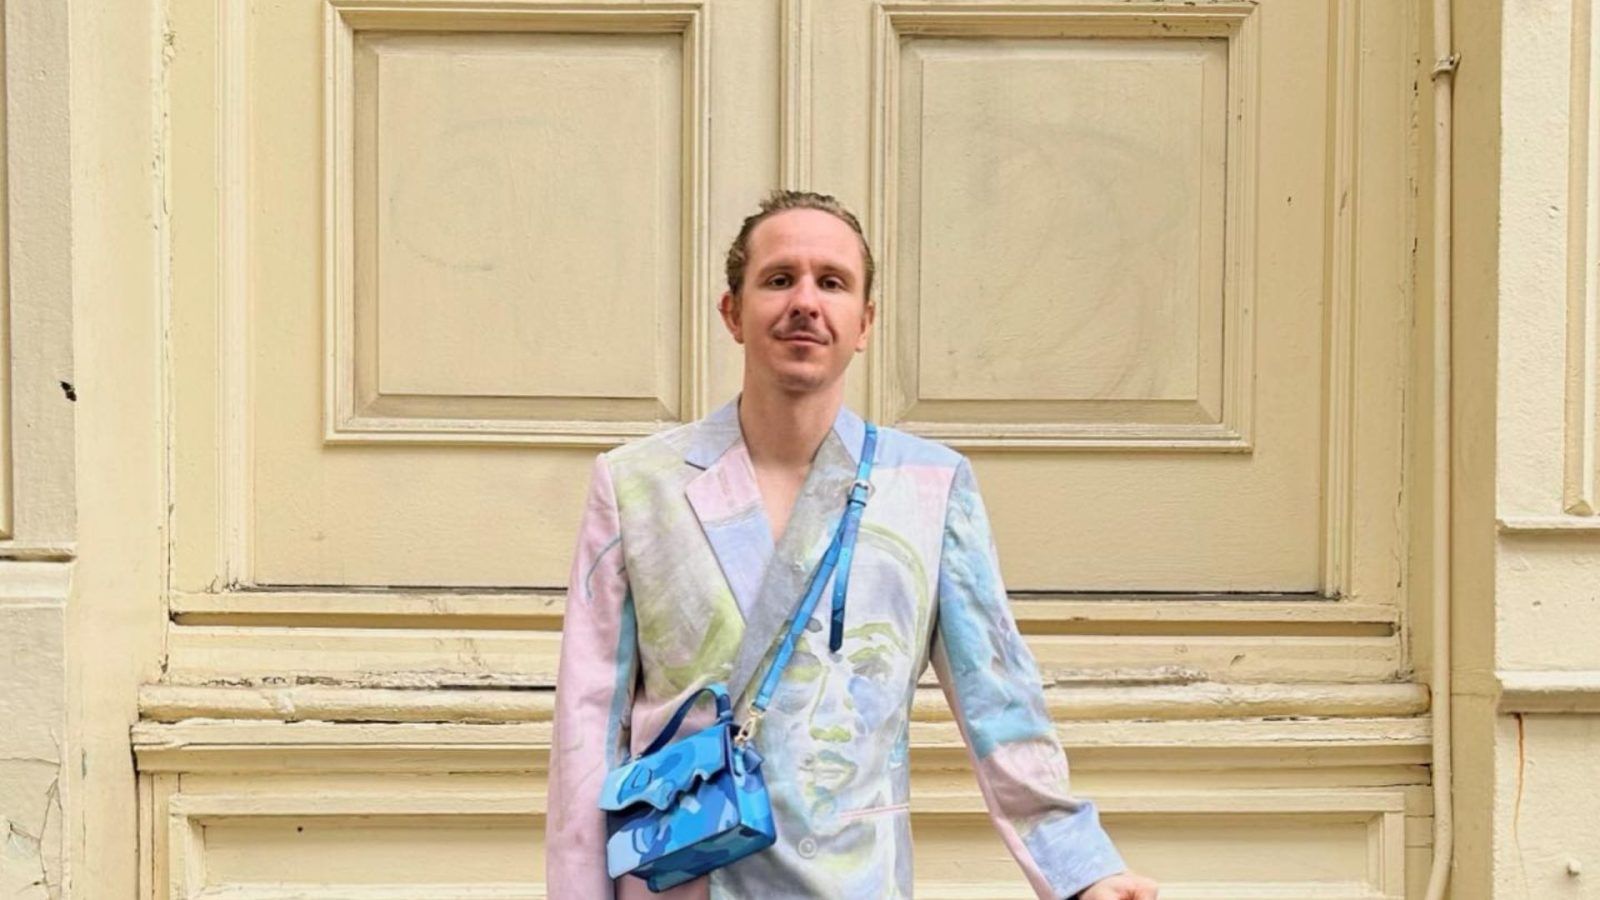 Creations of Louis Vuitton presented during 2019 Spring/Summer Women's  collection show in Paris (3) - People's Daily Online